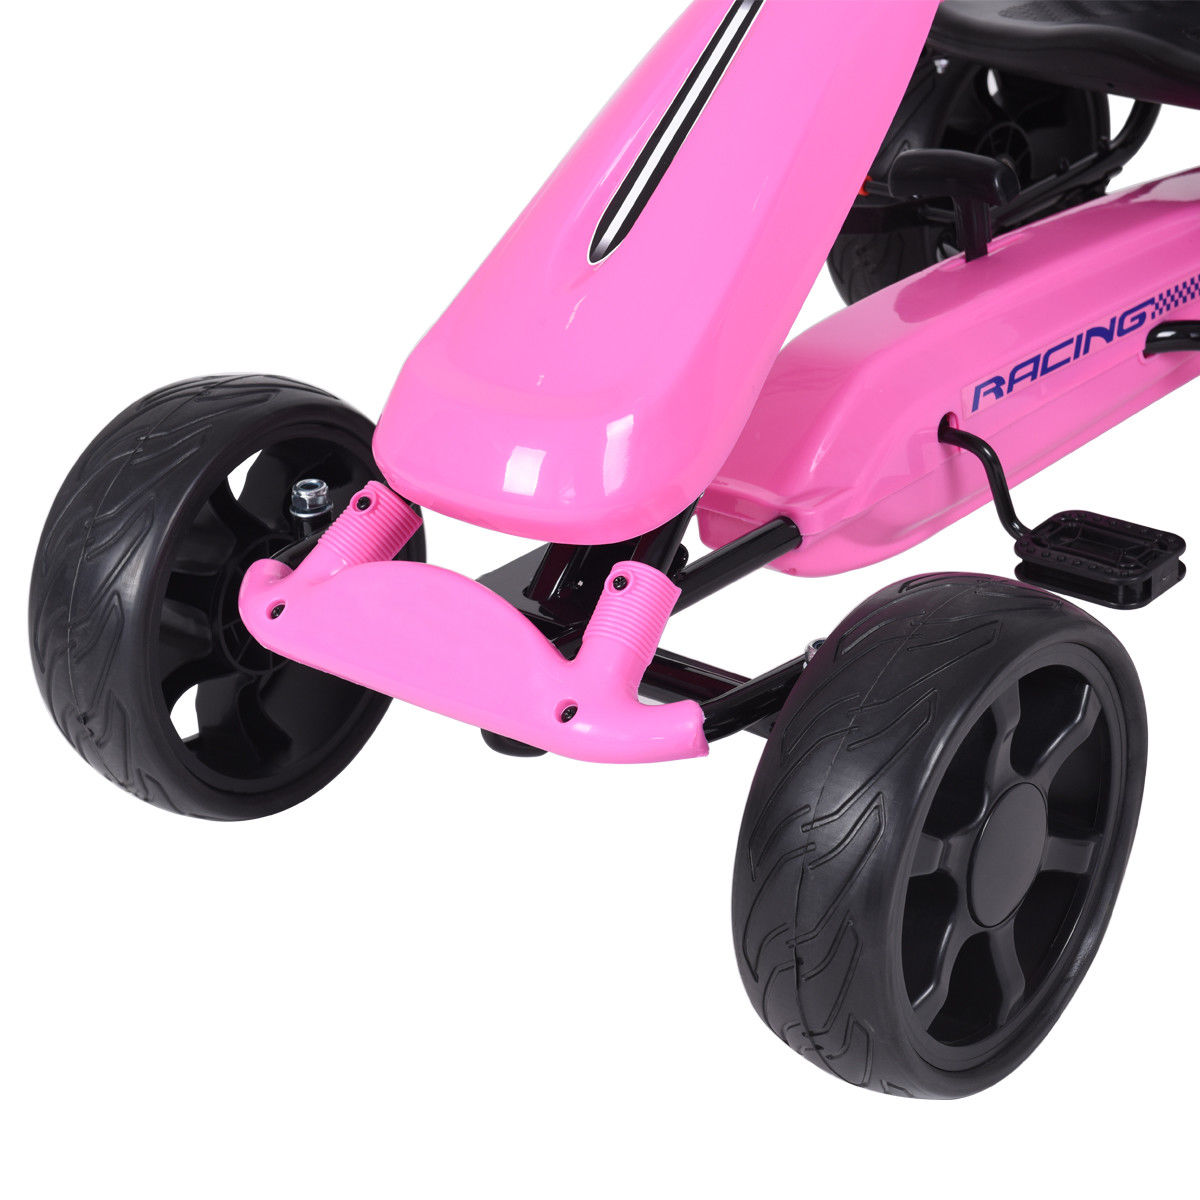 Go Kart Kids Ride On Car Pedal Powered 4 Wheel Racer Stealth Outdoor Toy Pink - image 3 of 10